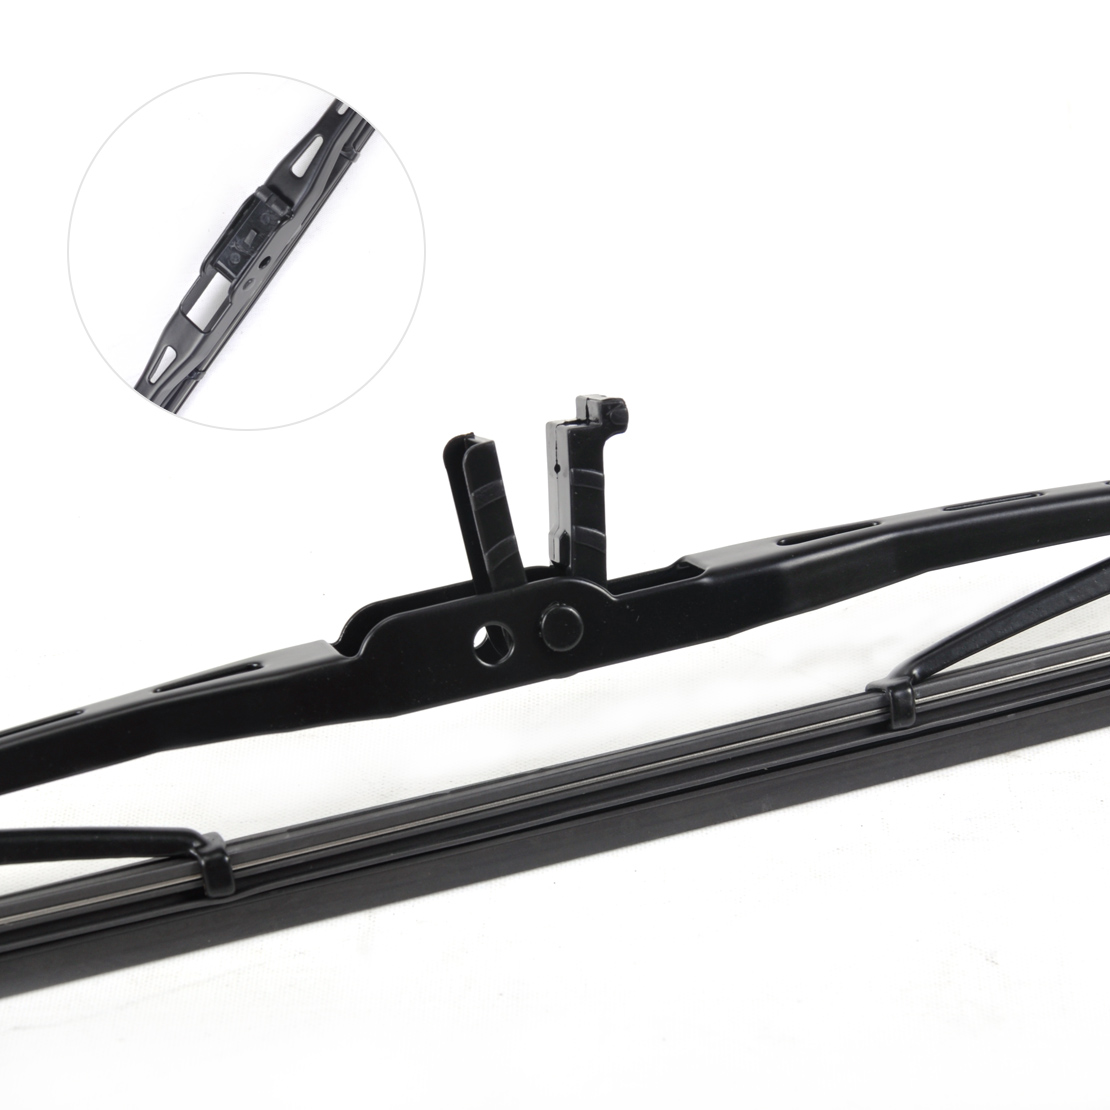 For Land Rover Range Rover Sport 2006-2011 Rear Window Windshield Wiper Blade | eBay 2011 Range Rover Sport Wiper Blade Size